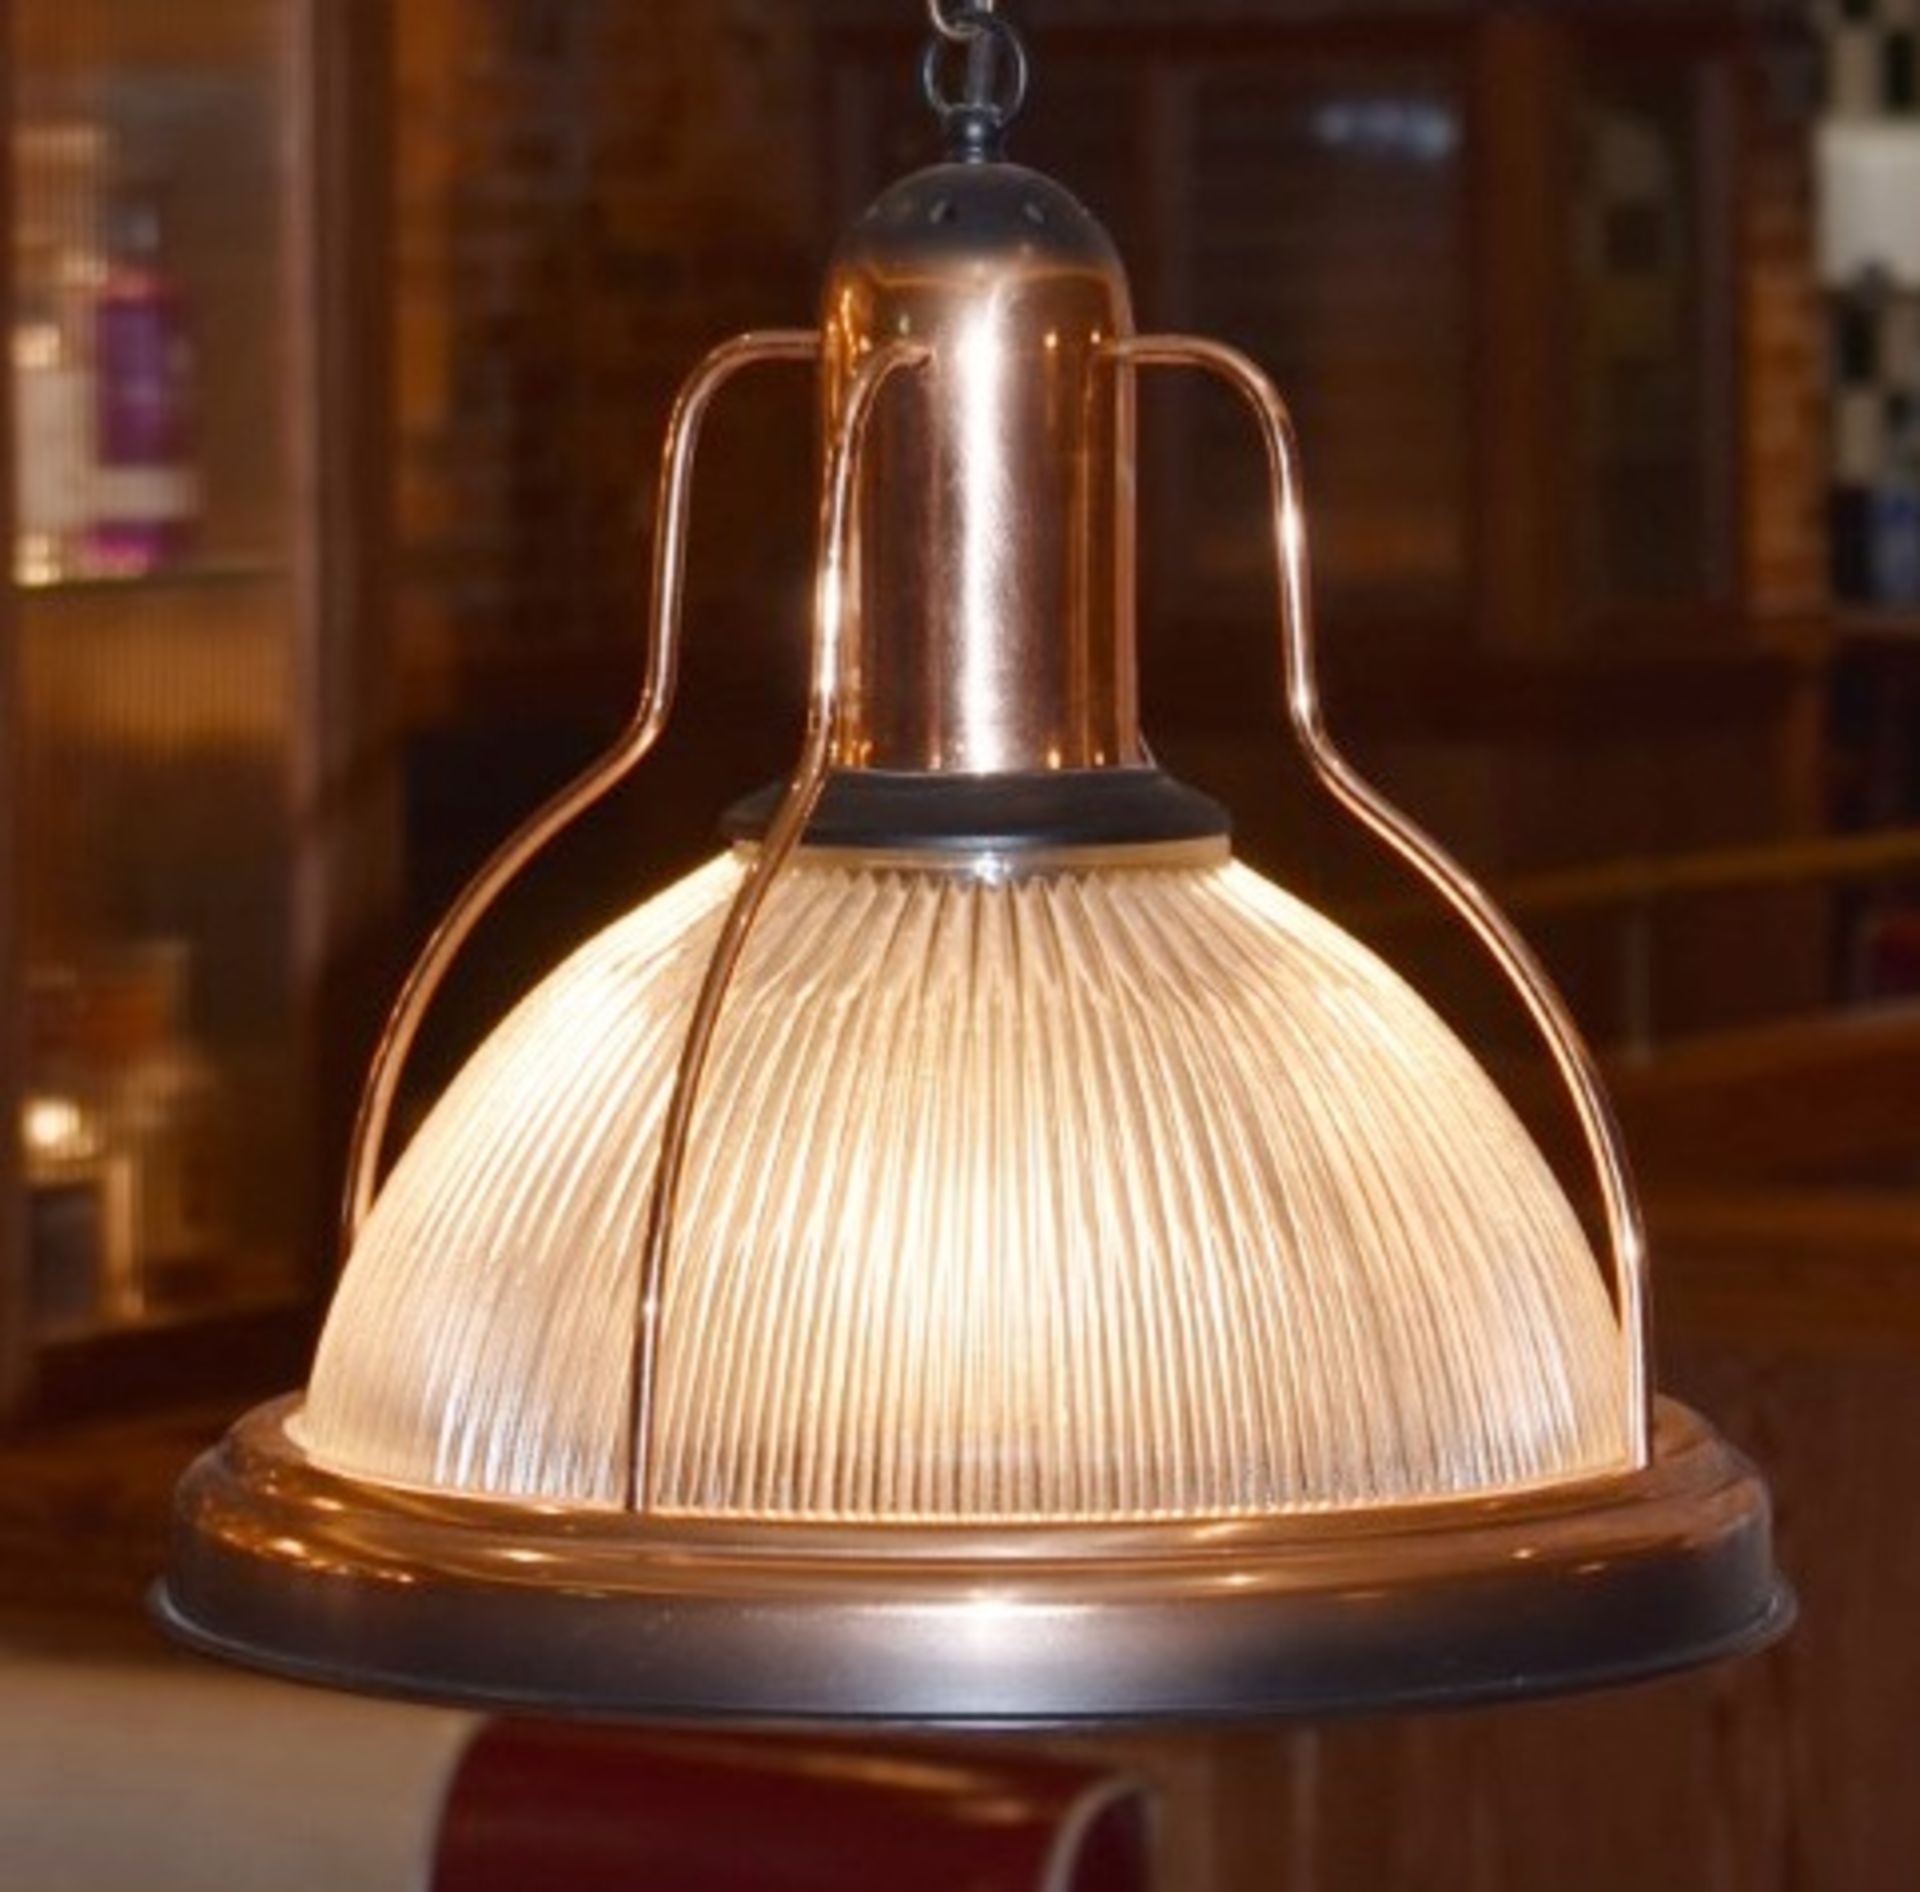 6 x Industrial-style Pendant Light Fittings In Copper With Pleated Glass Shades - Image 2 of 2